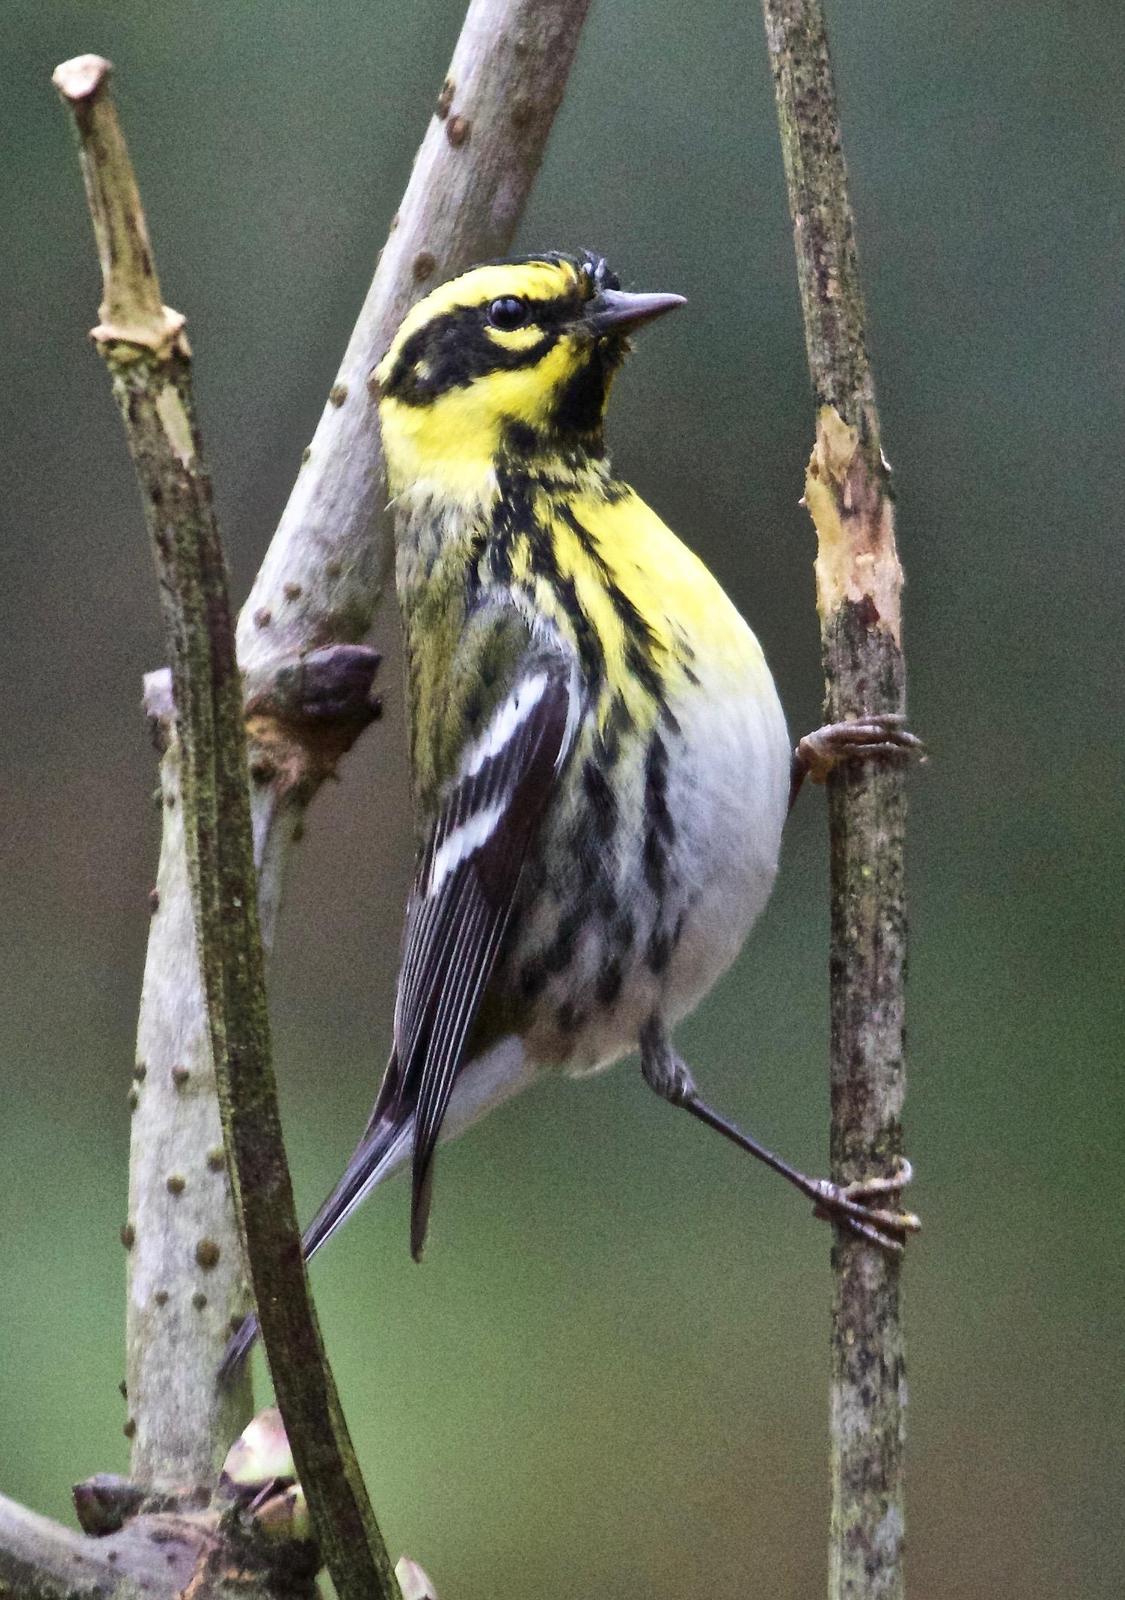 Townsend's Warbler Photo by Rob O'Donnell